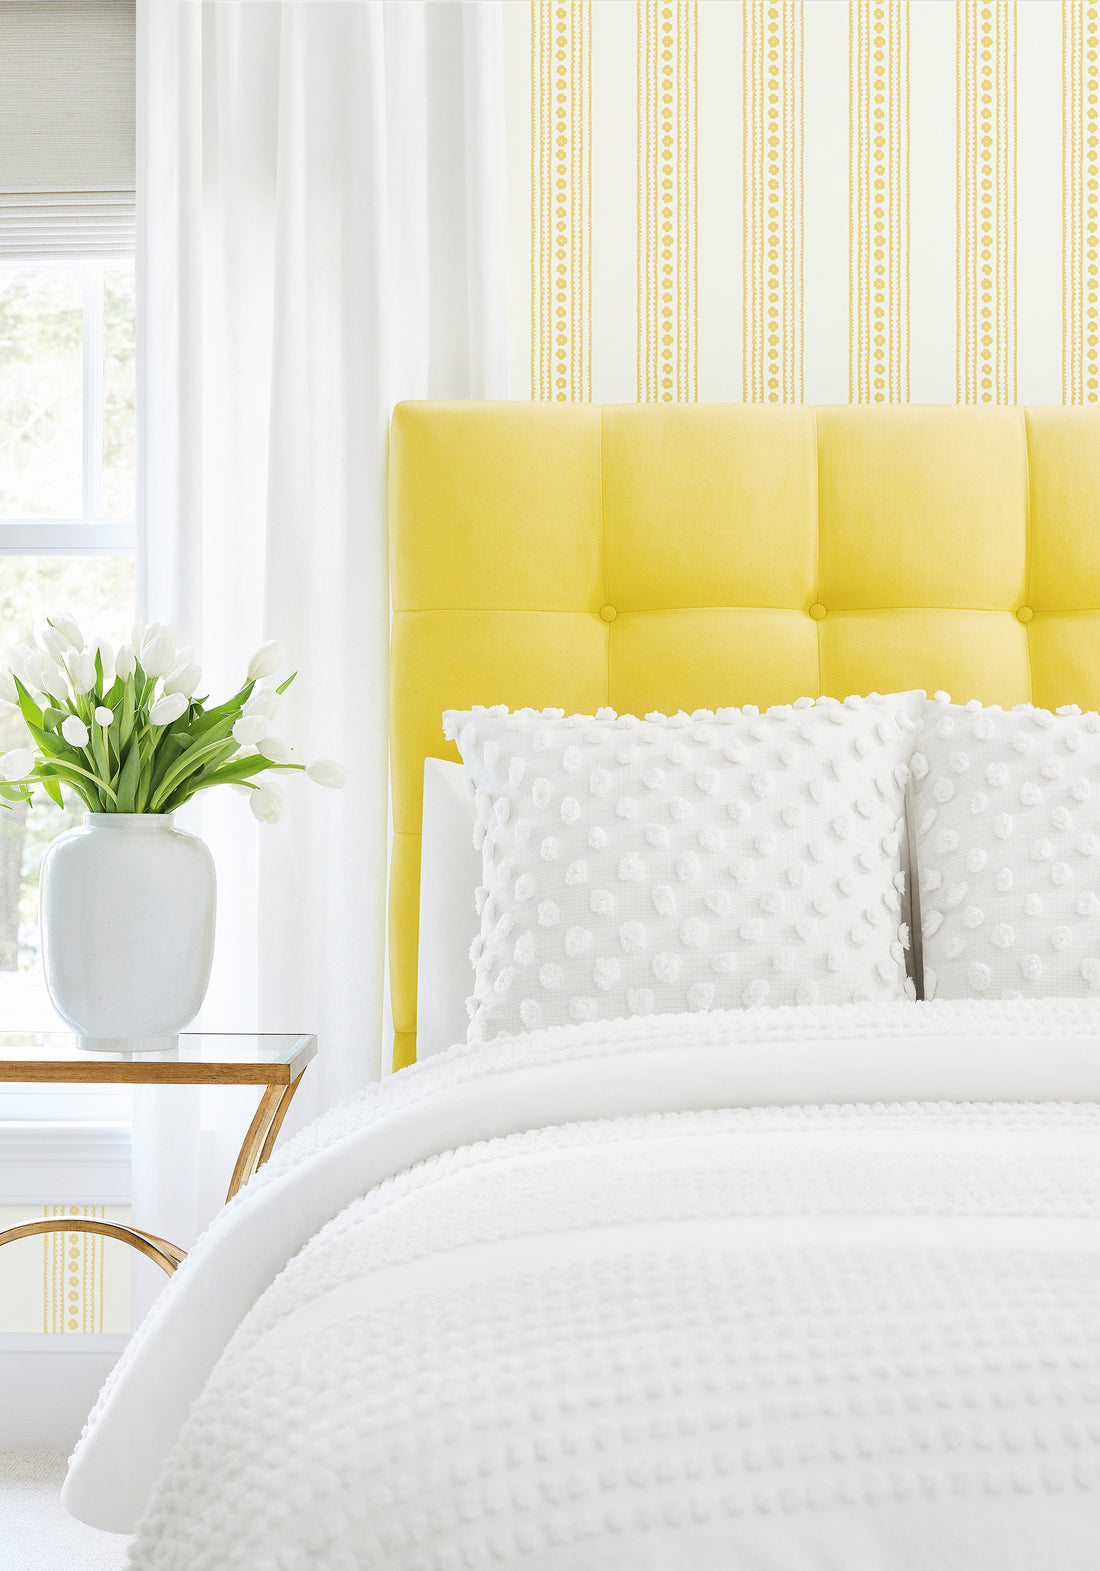 Sonoma Headboard in Club Velvet sustainable woven fabric in sunshine color - pattern number W7259 by Thibaut in the Club Velvet collection